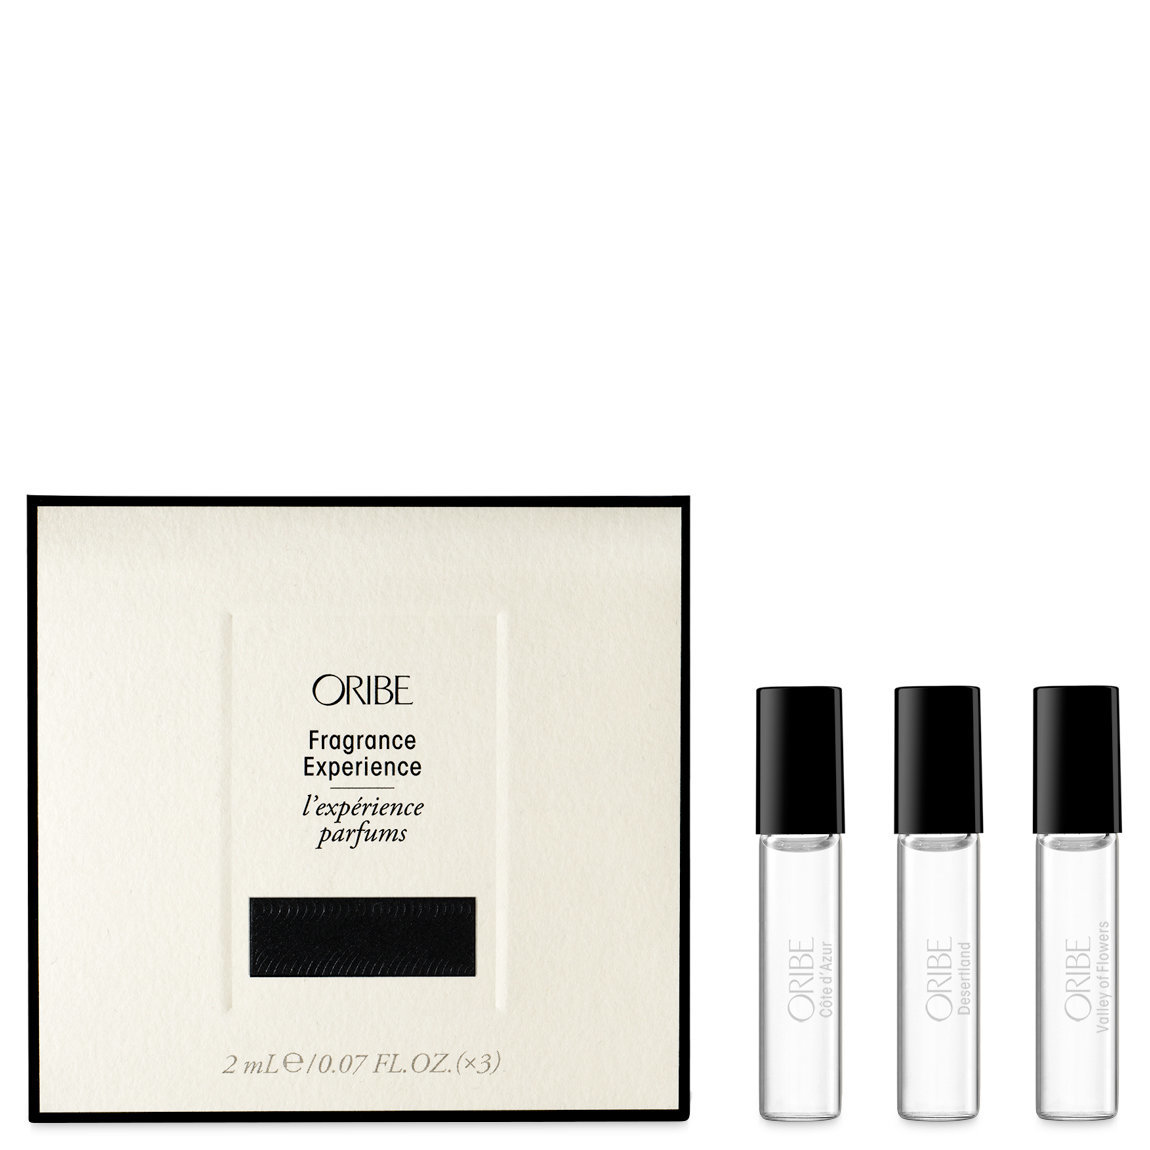 Oribe Fragrance Experience Set alternative view 1 - product swatch.